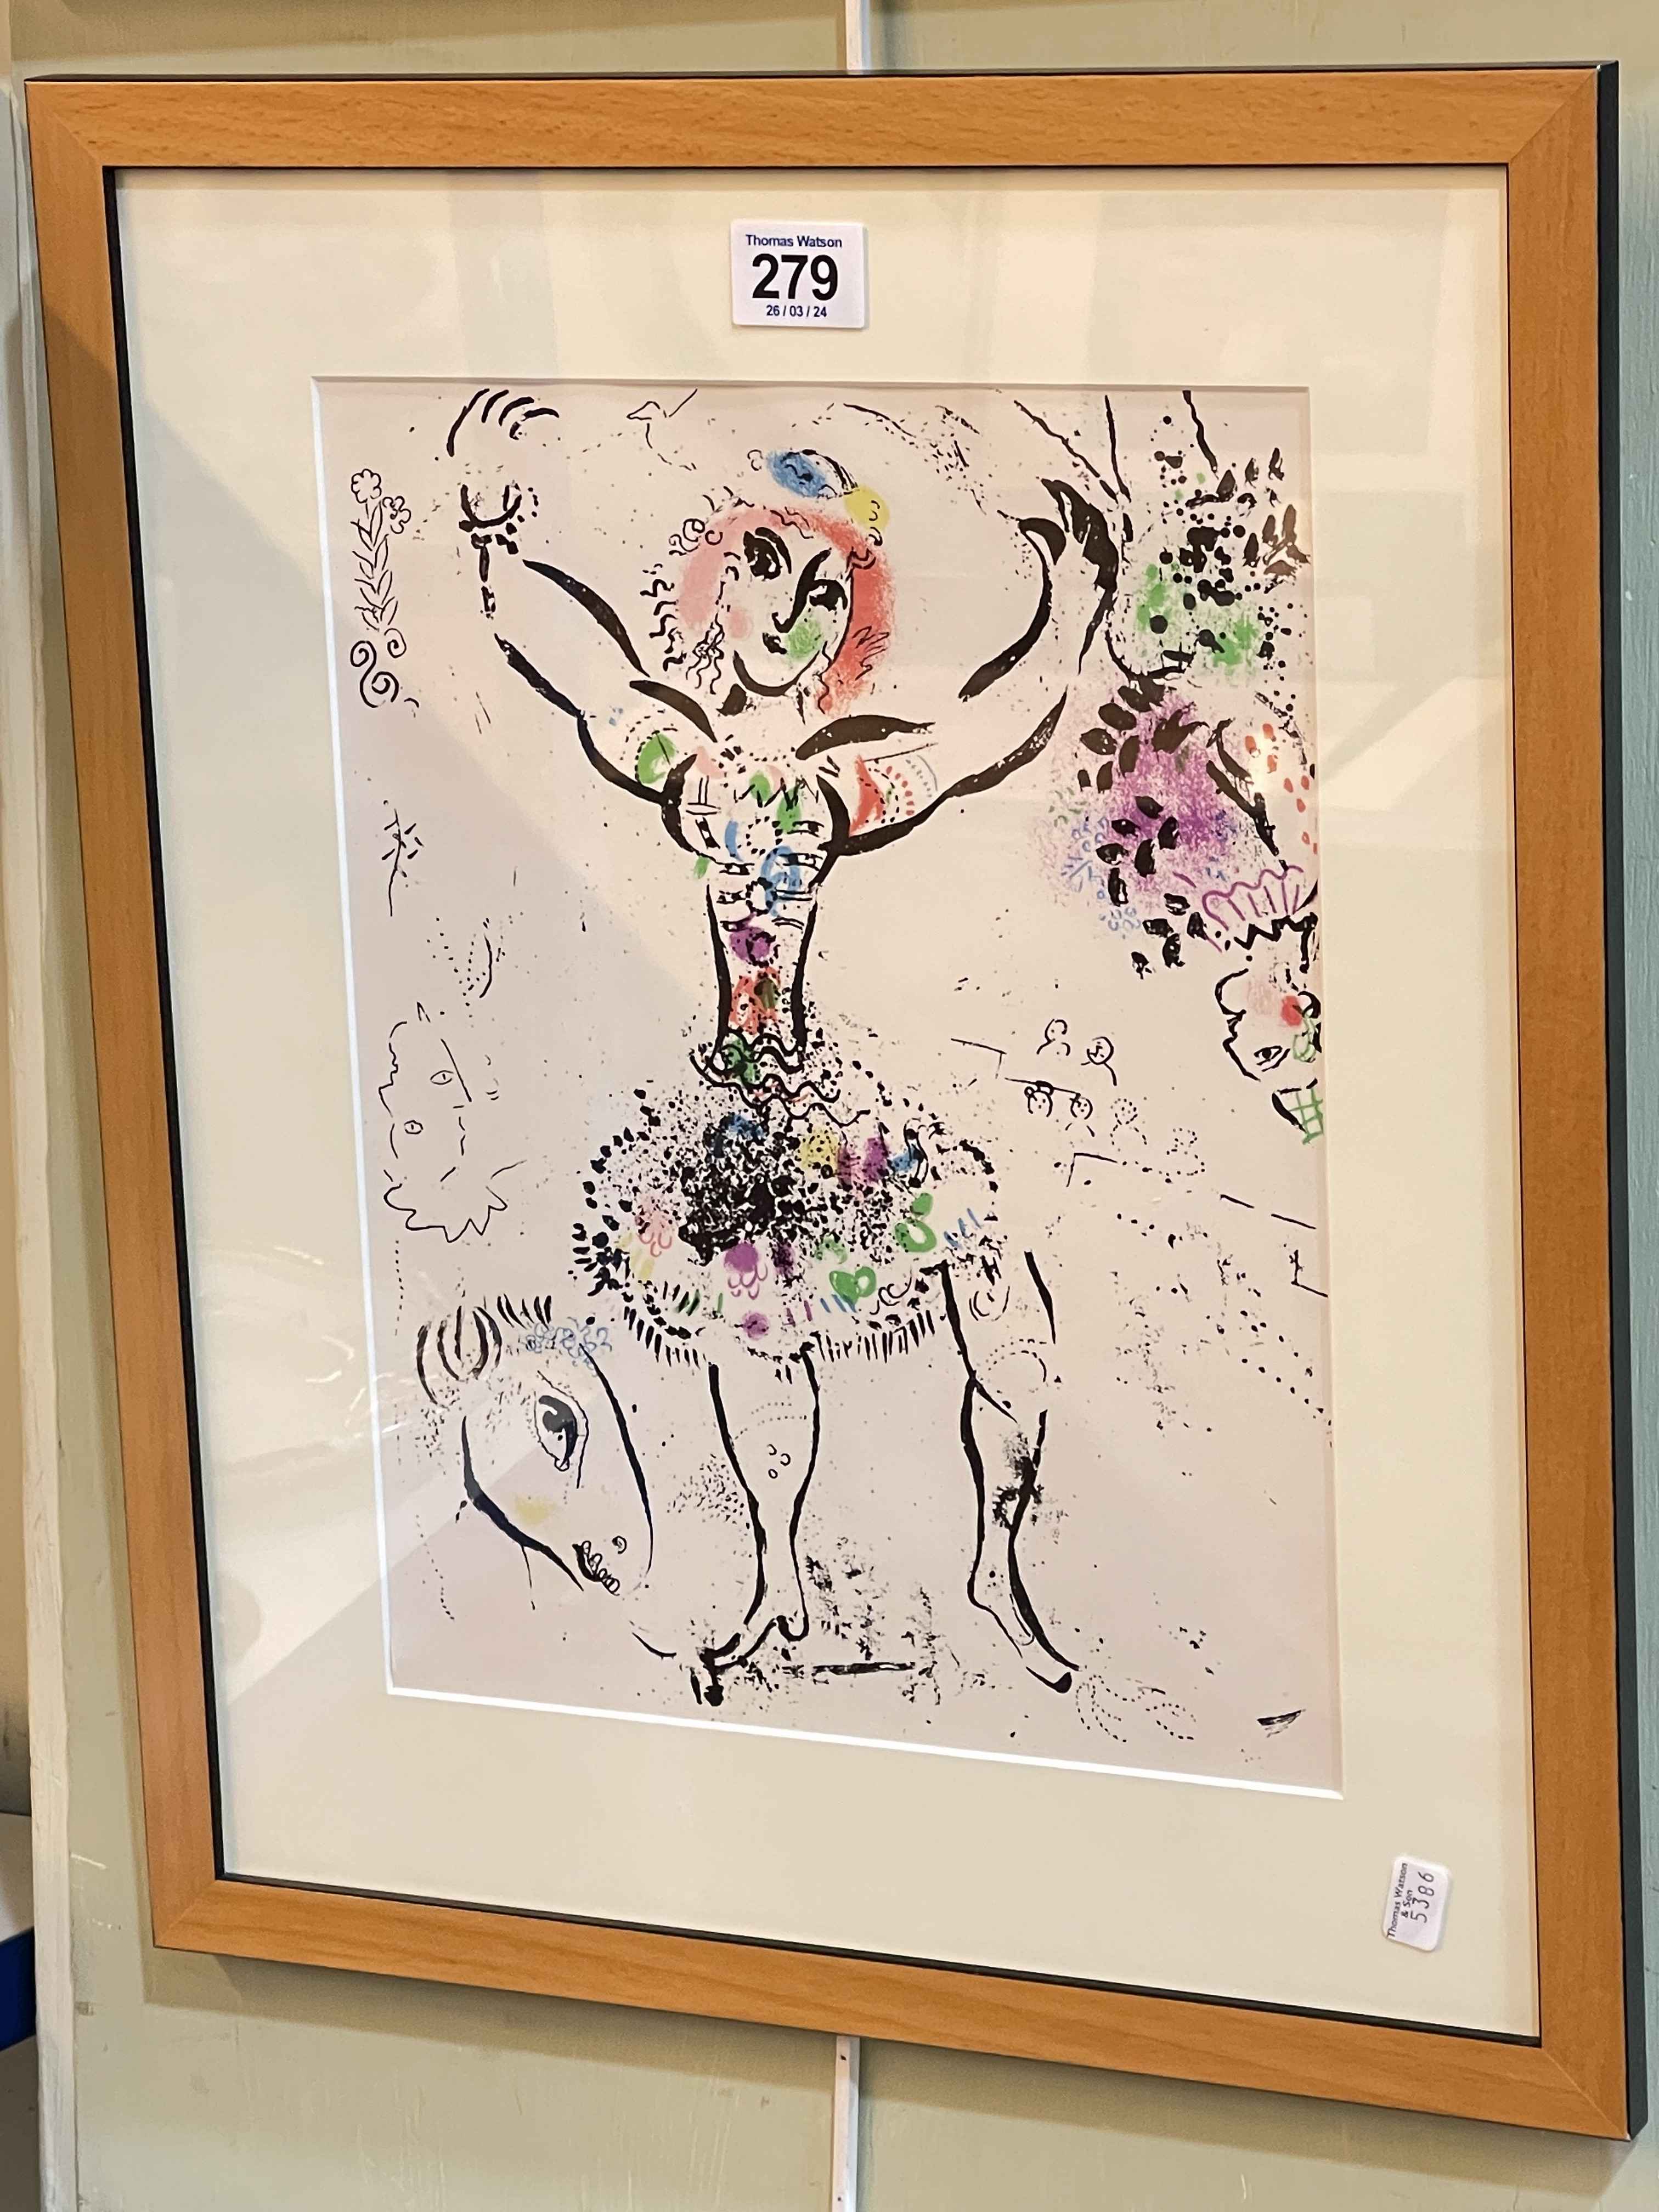 Marc Chagall, La Jongleuse, lithograph, 30.5cm by 23cm, in glazed frame, related text verso.